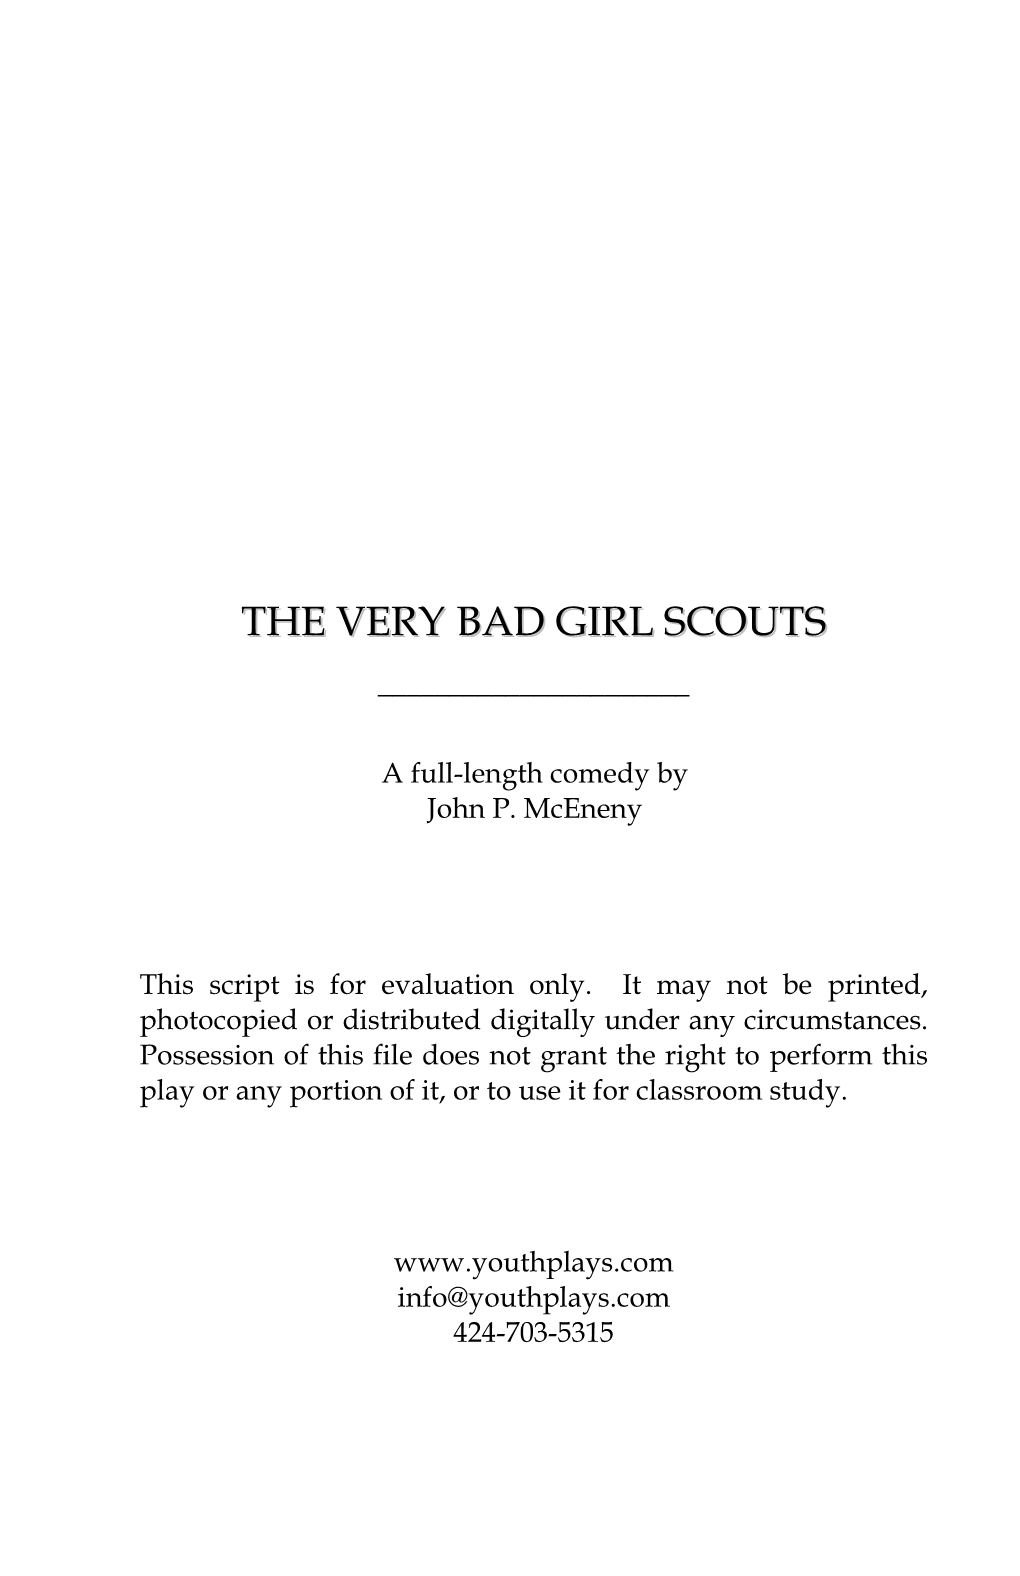 The Very Bad Girl Scouts